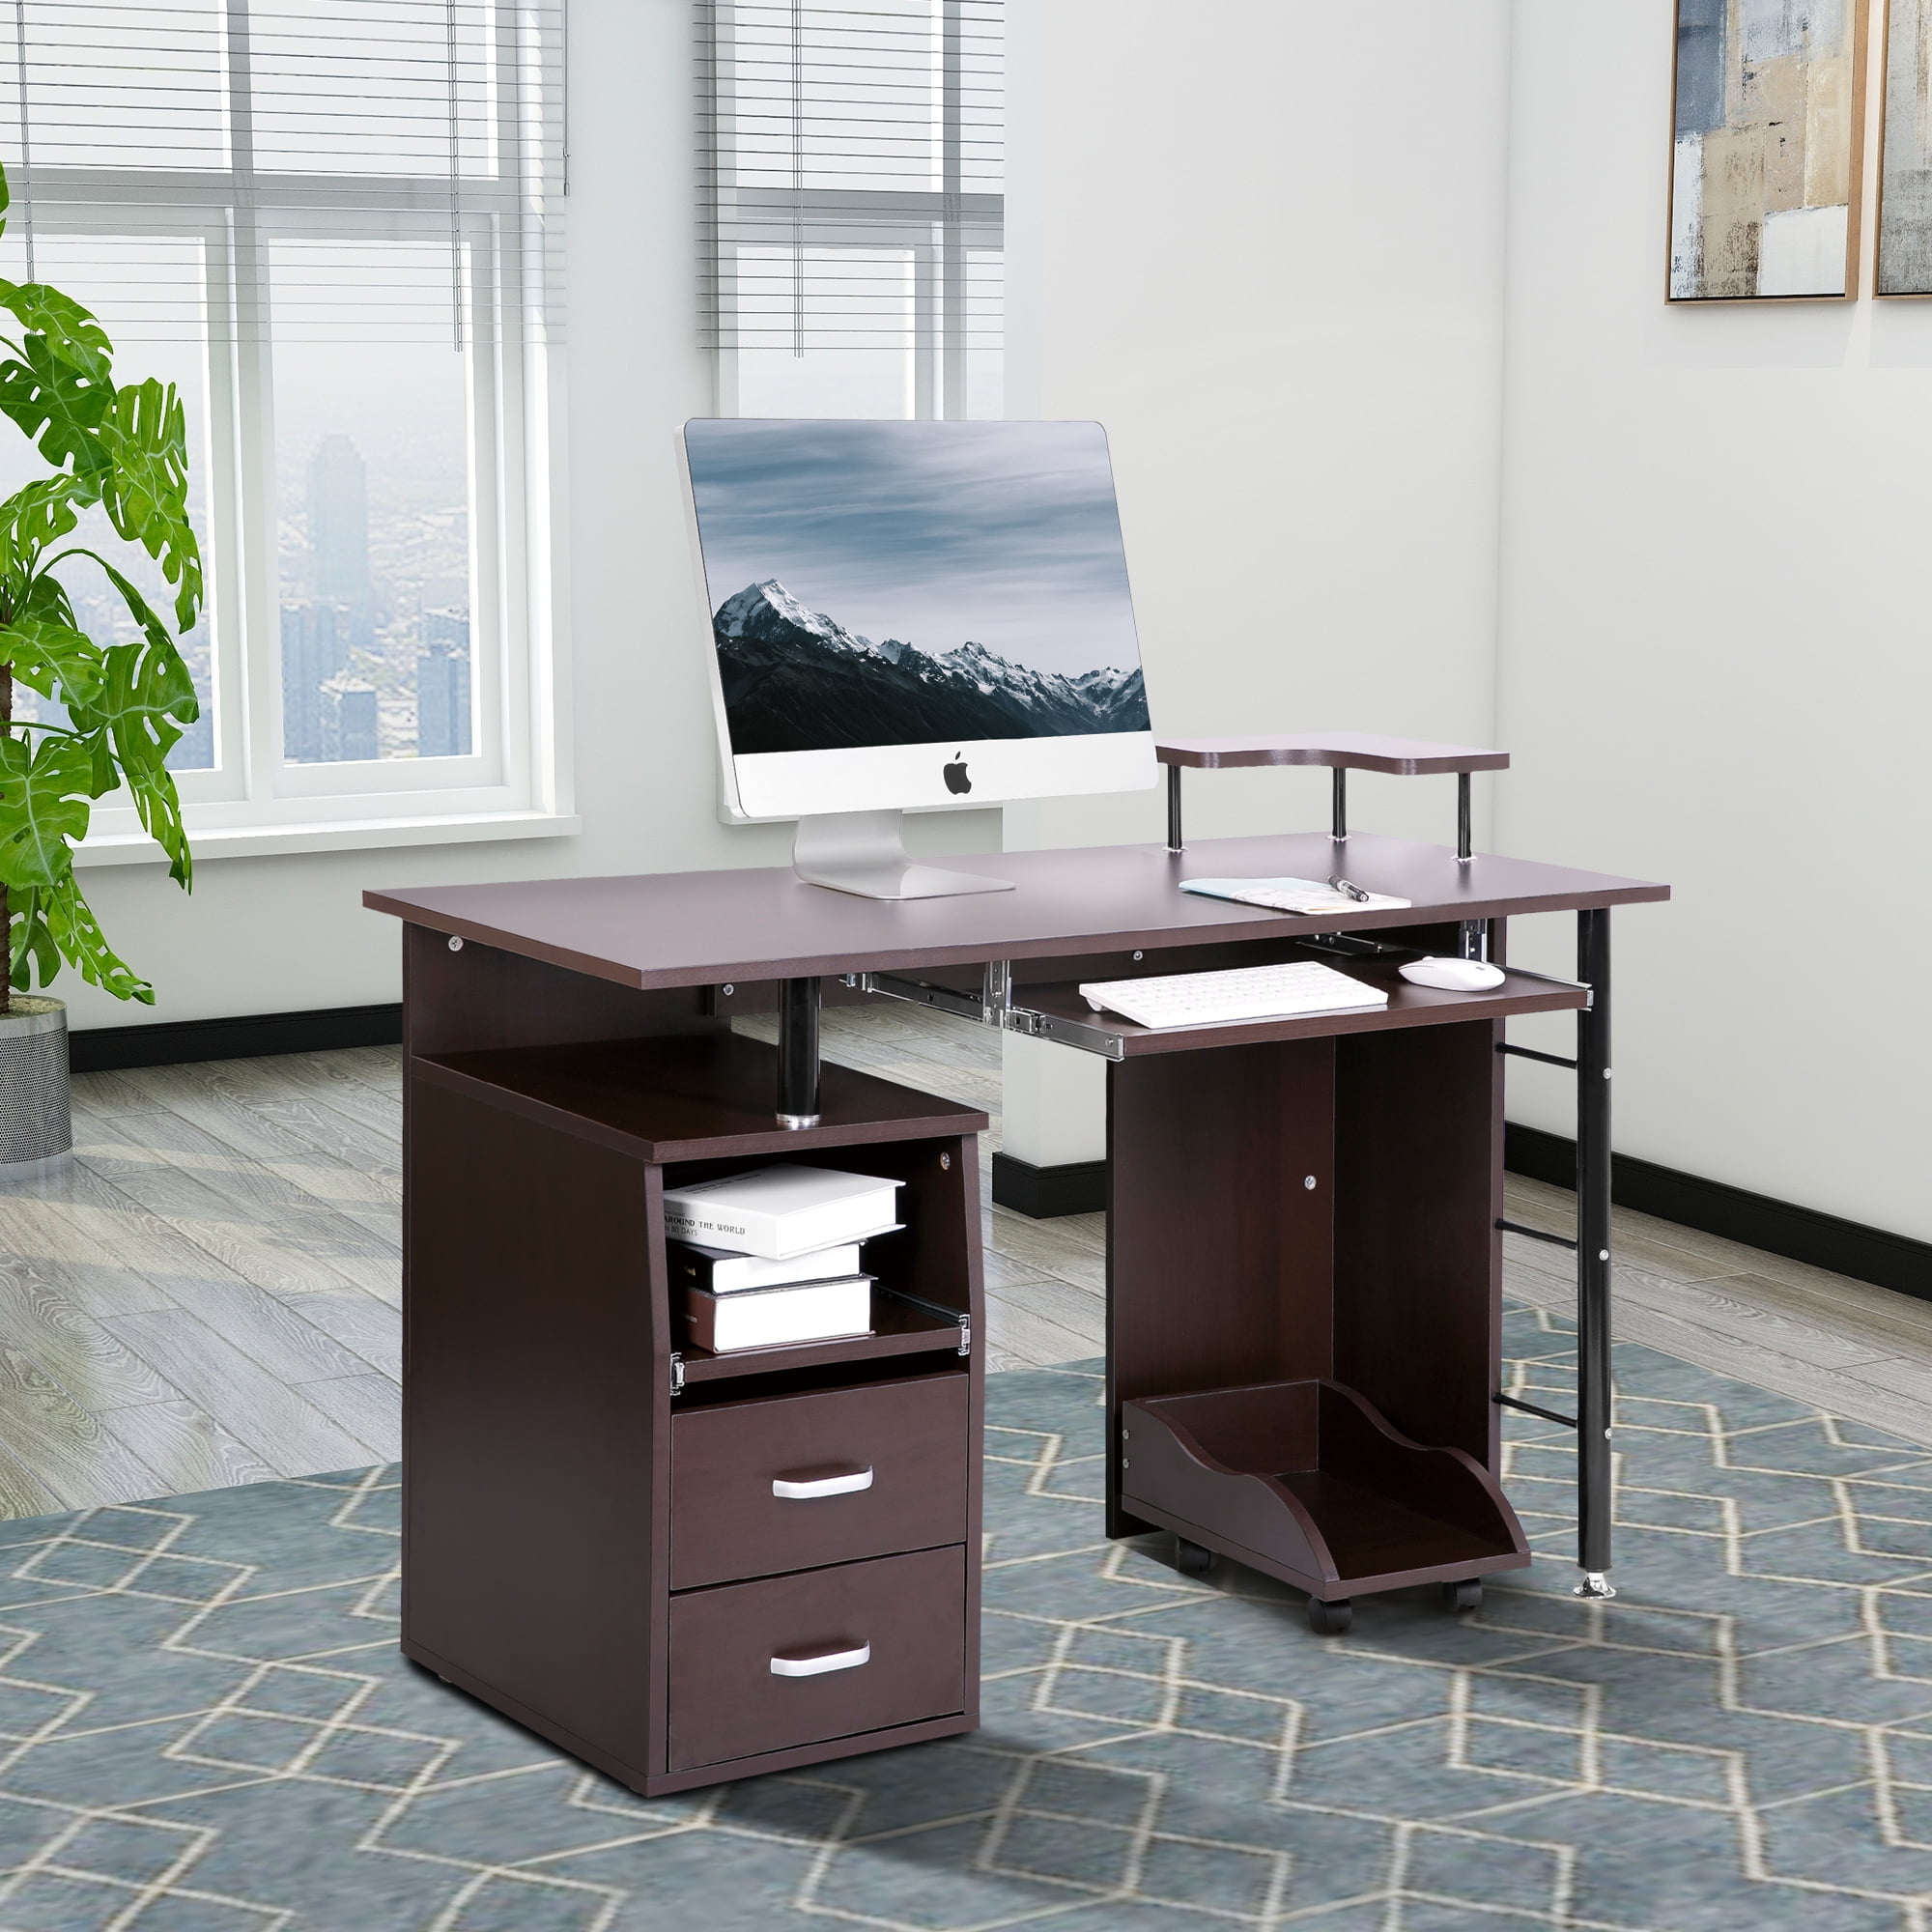 Euroco Contemporary Wooden Computer Desk With Keyboard Tray And